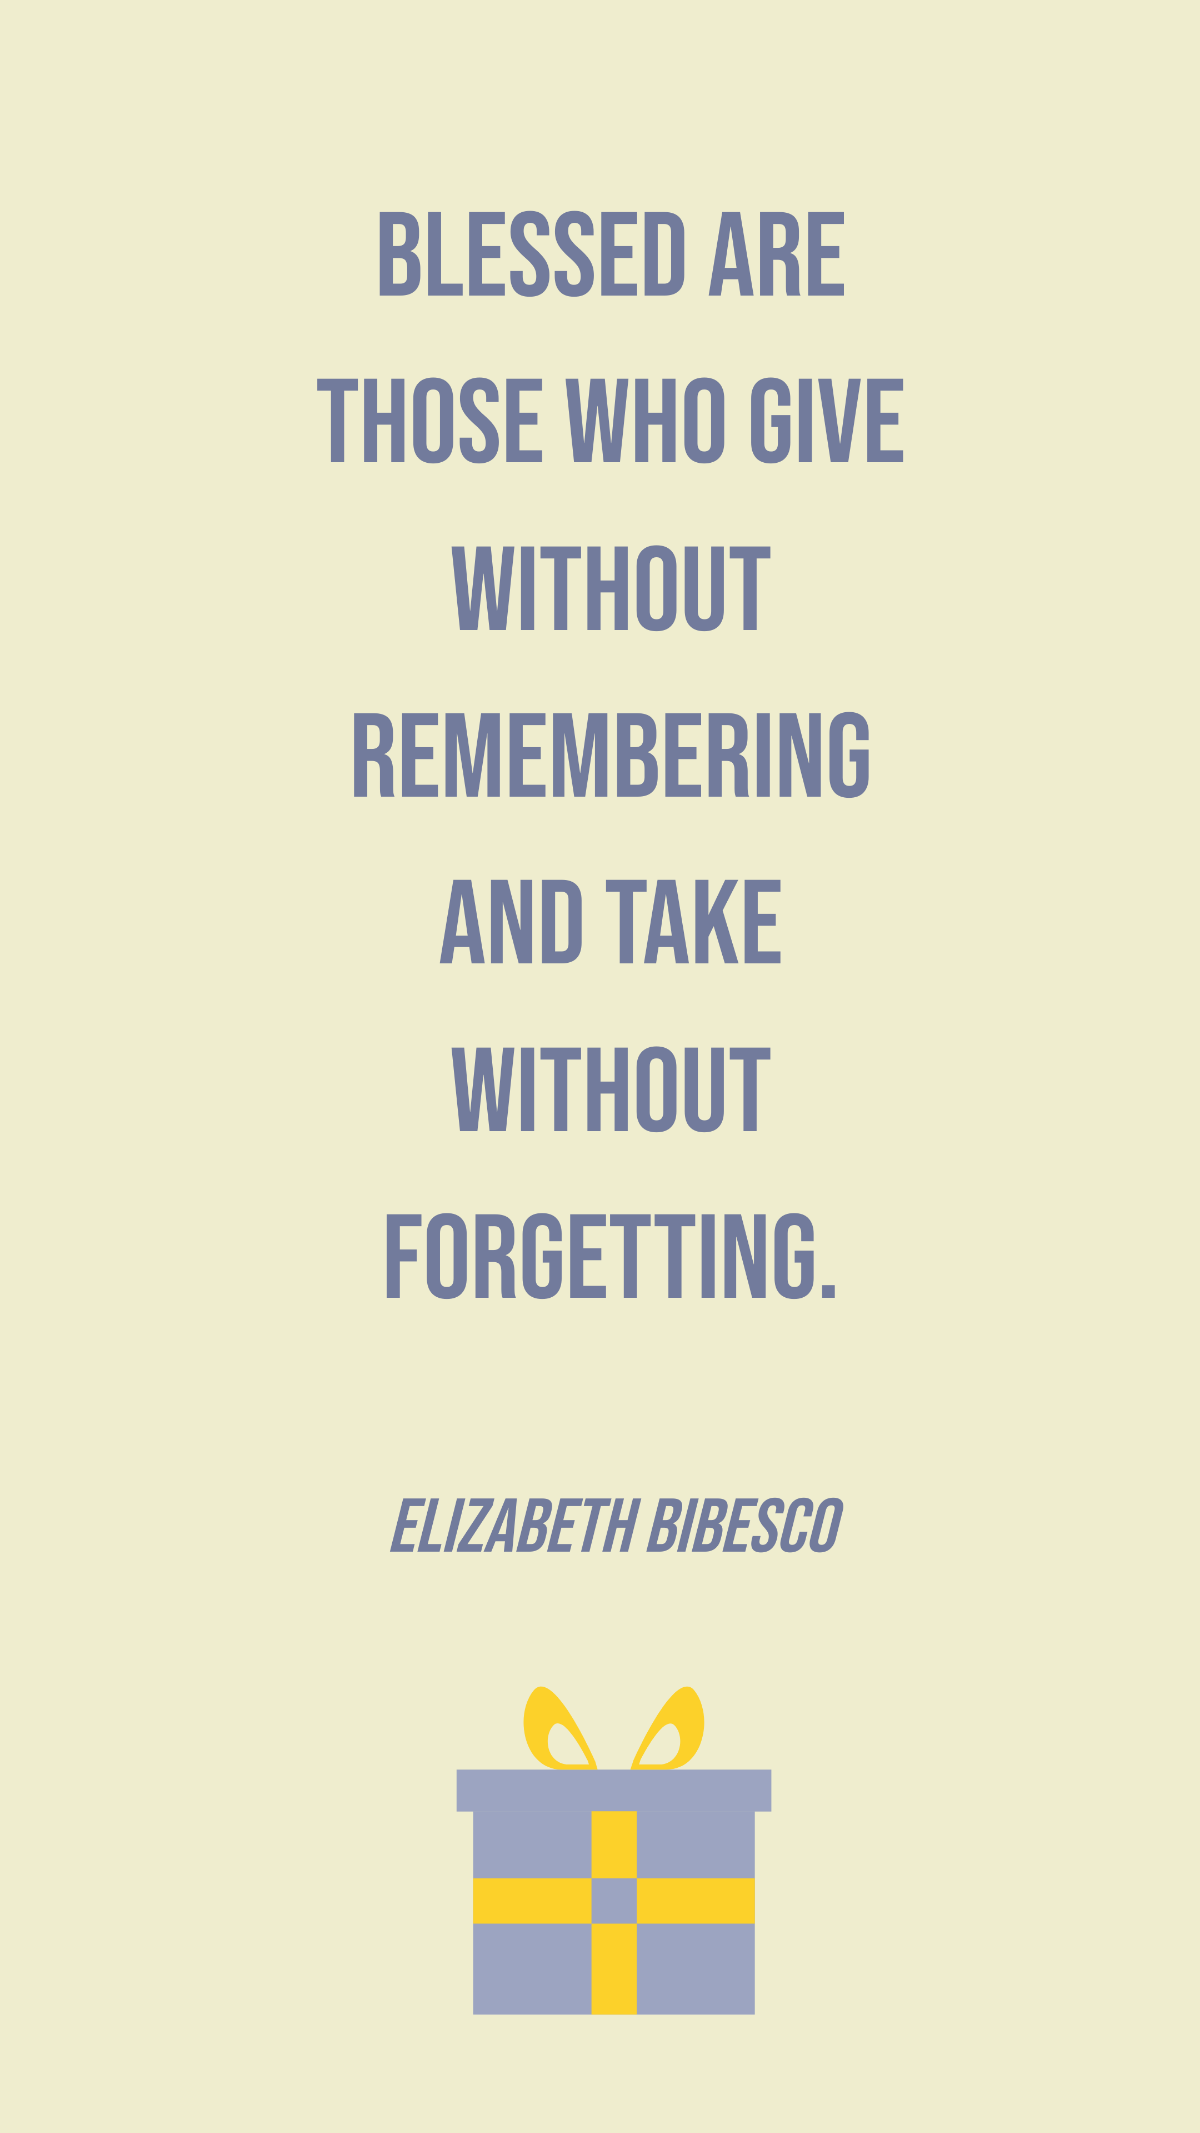 Free Elizabeth Bibesco - Blessed are those who give without remembering and take without forgetting. Template